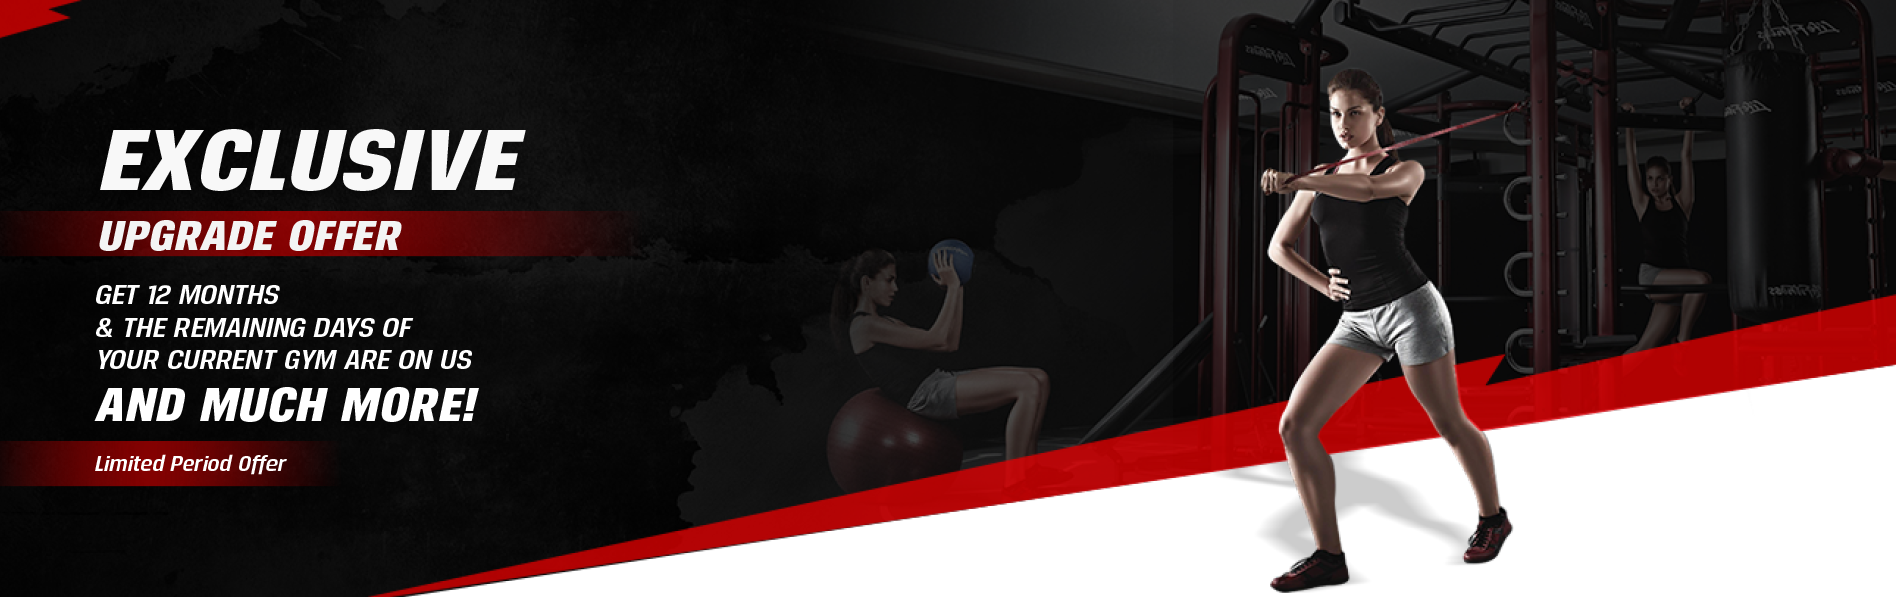 Exclusive Offer! Get 12 months & The remaining days of your current GYM are on us and Much More